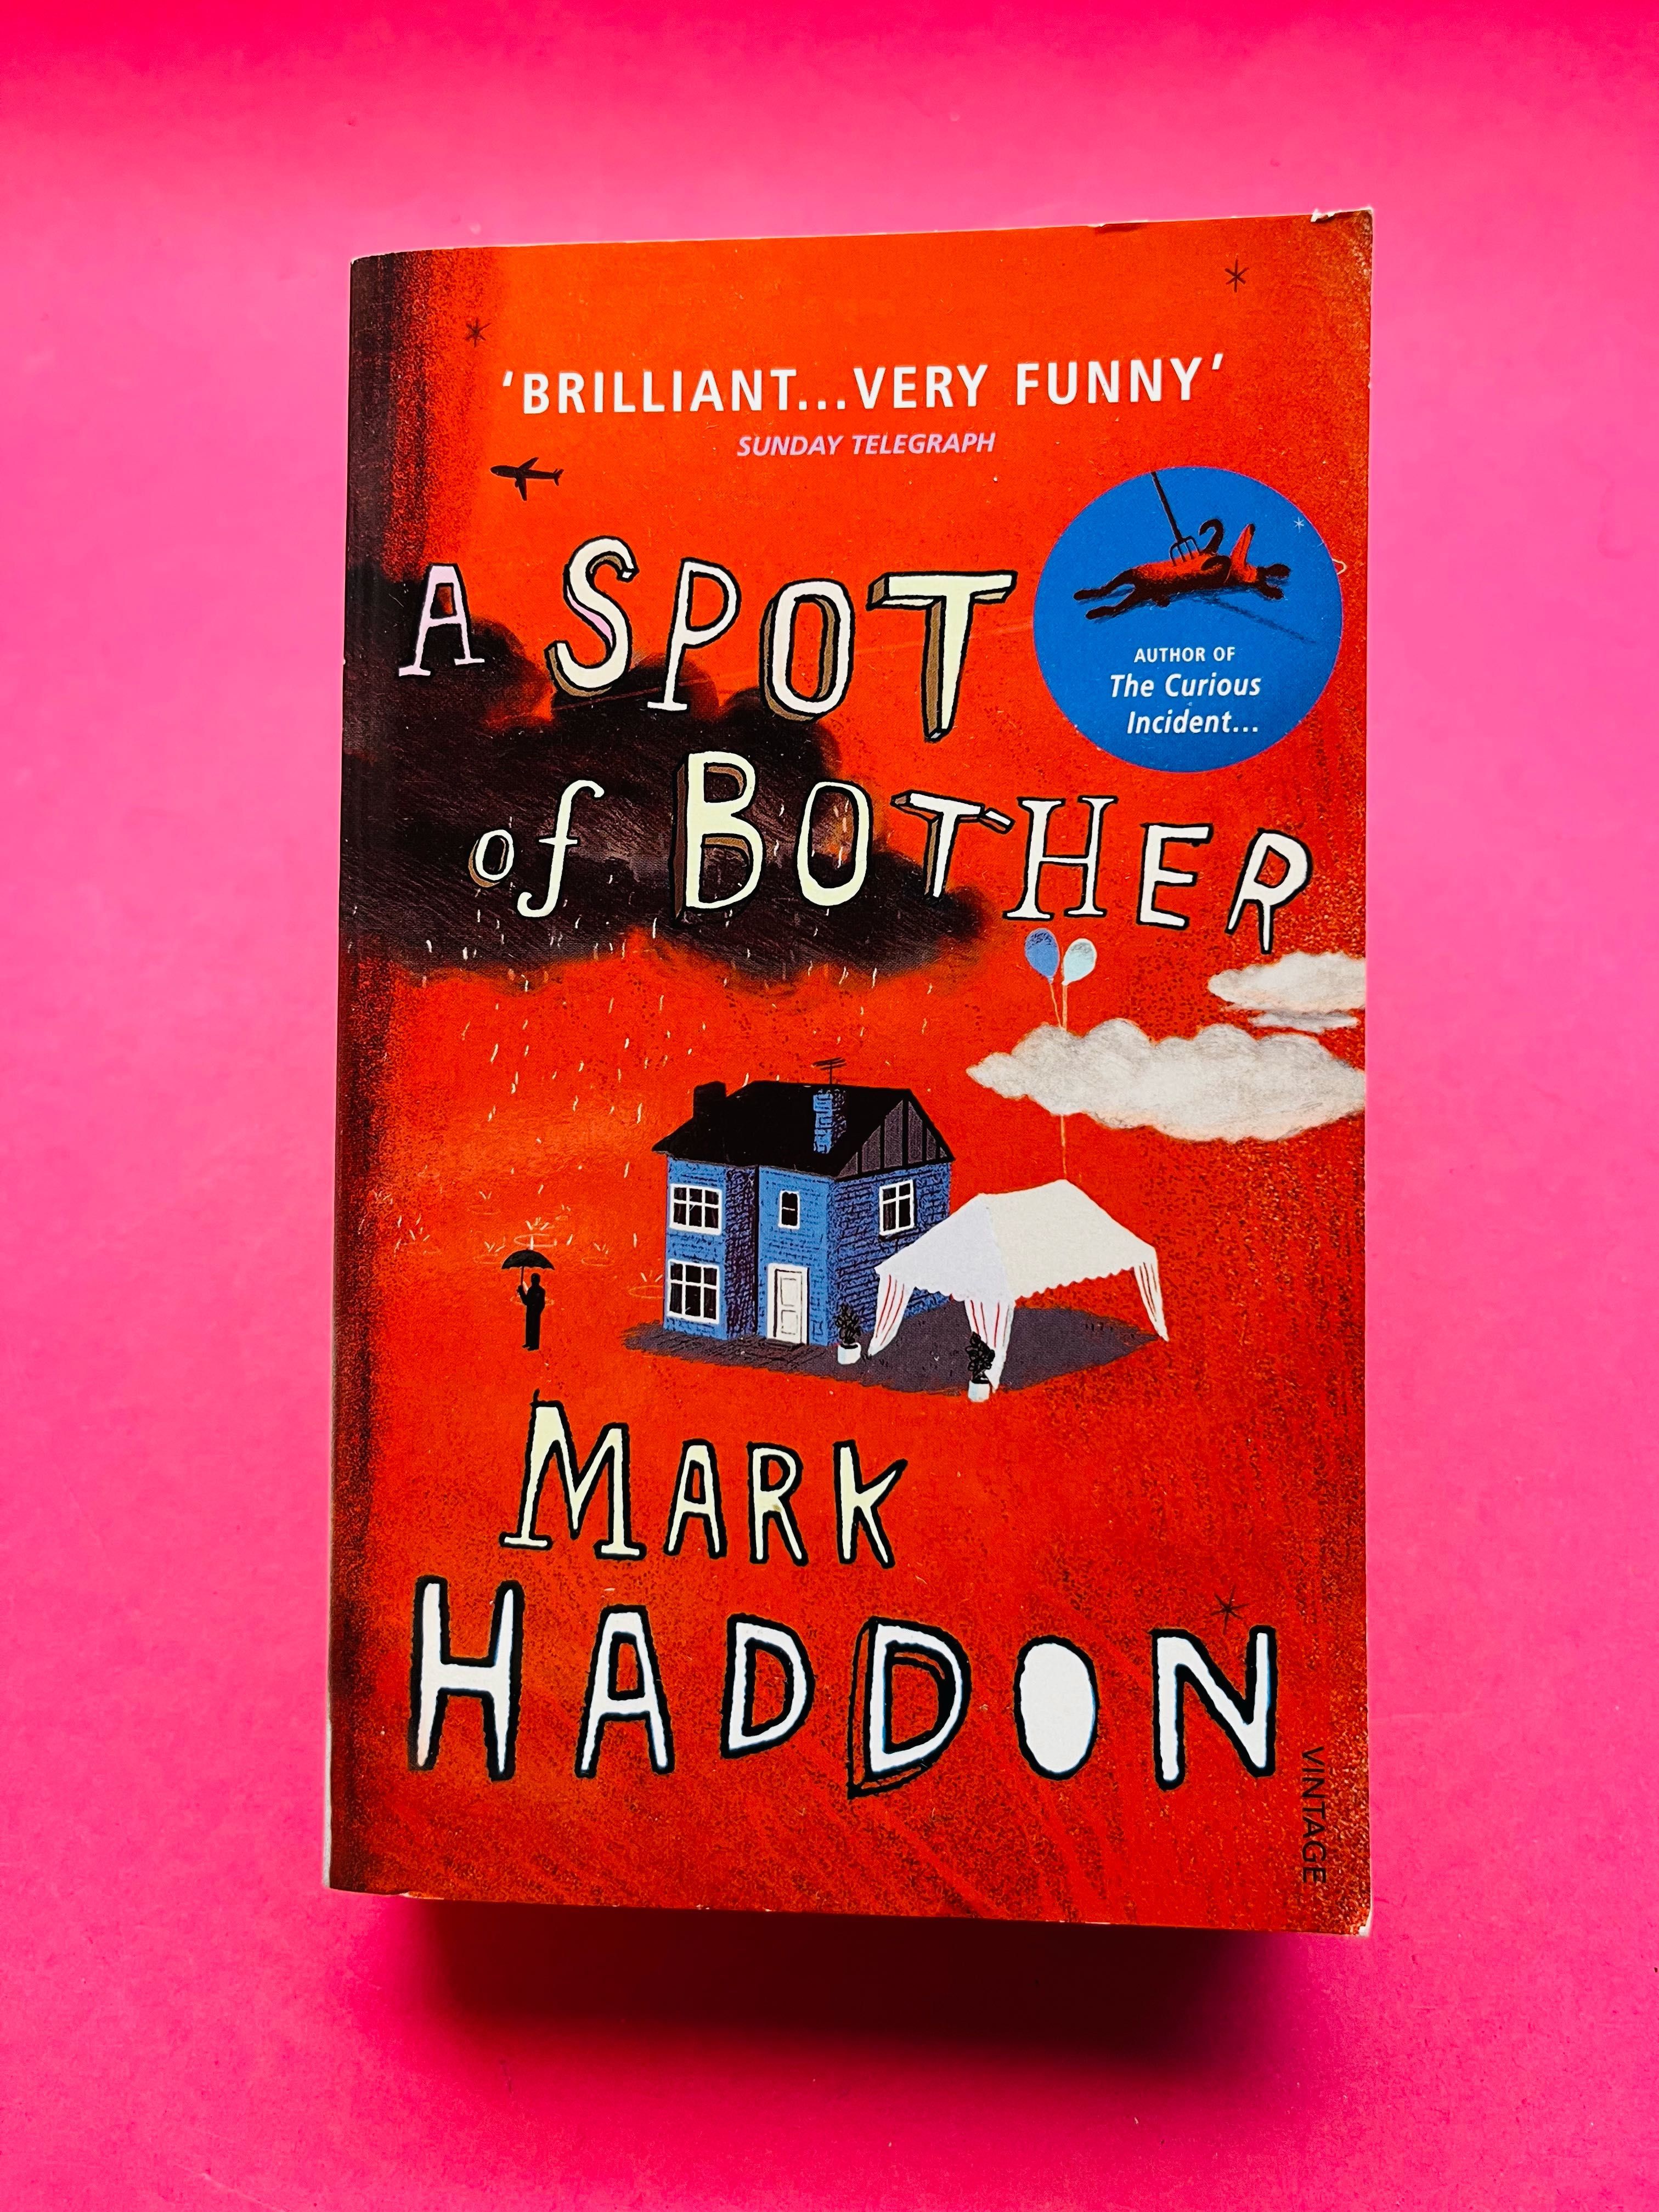 A Spot of Brother - Mark Haddon